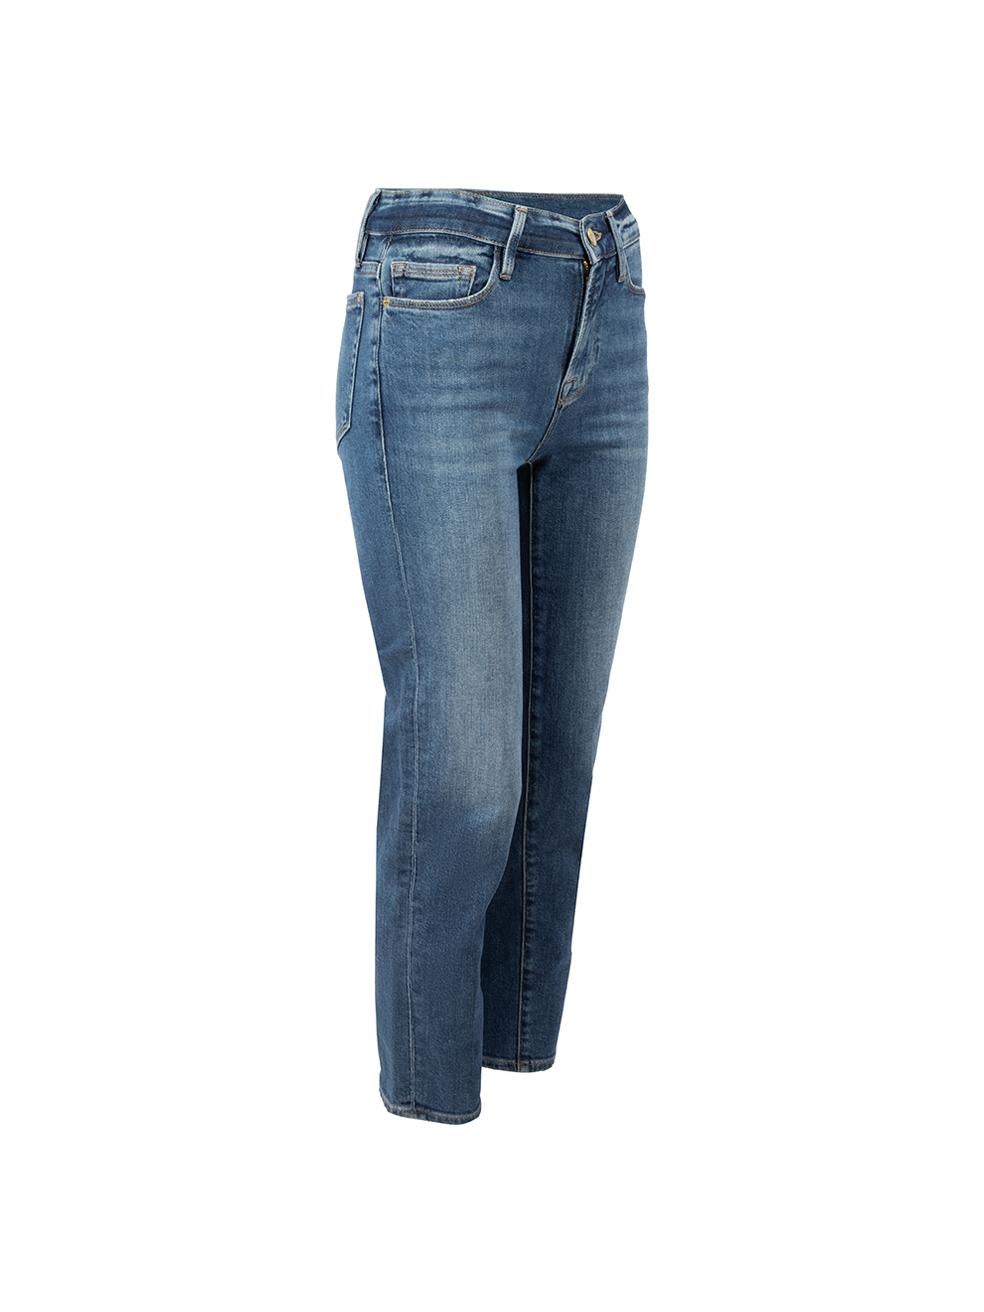 CONDITION is Very good. Minimal wear to jeans is evident. Minimal wear to the left leg with small mark on this used FRAME designer resale item.




Details


Blue

Denim

Straight leg jeans

Mid rise

Front zip closure with button

Front side